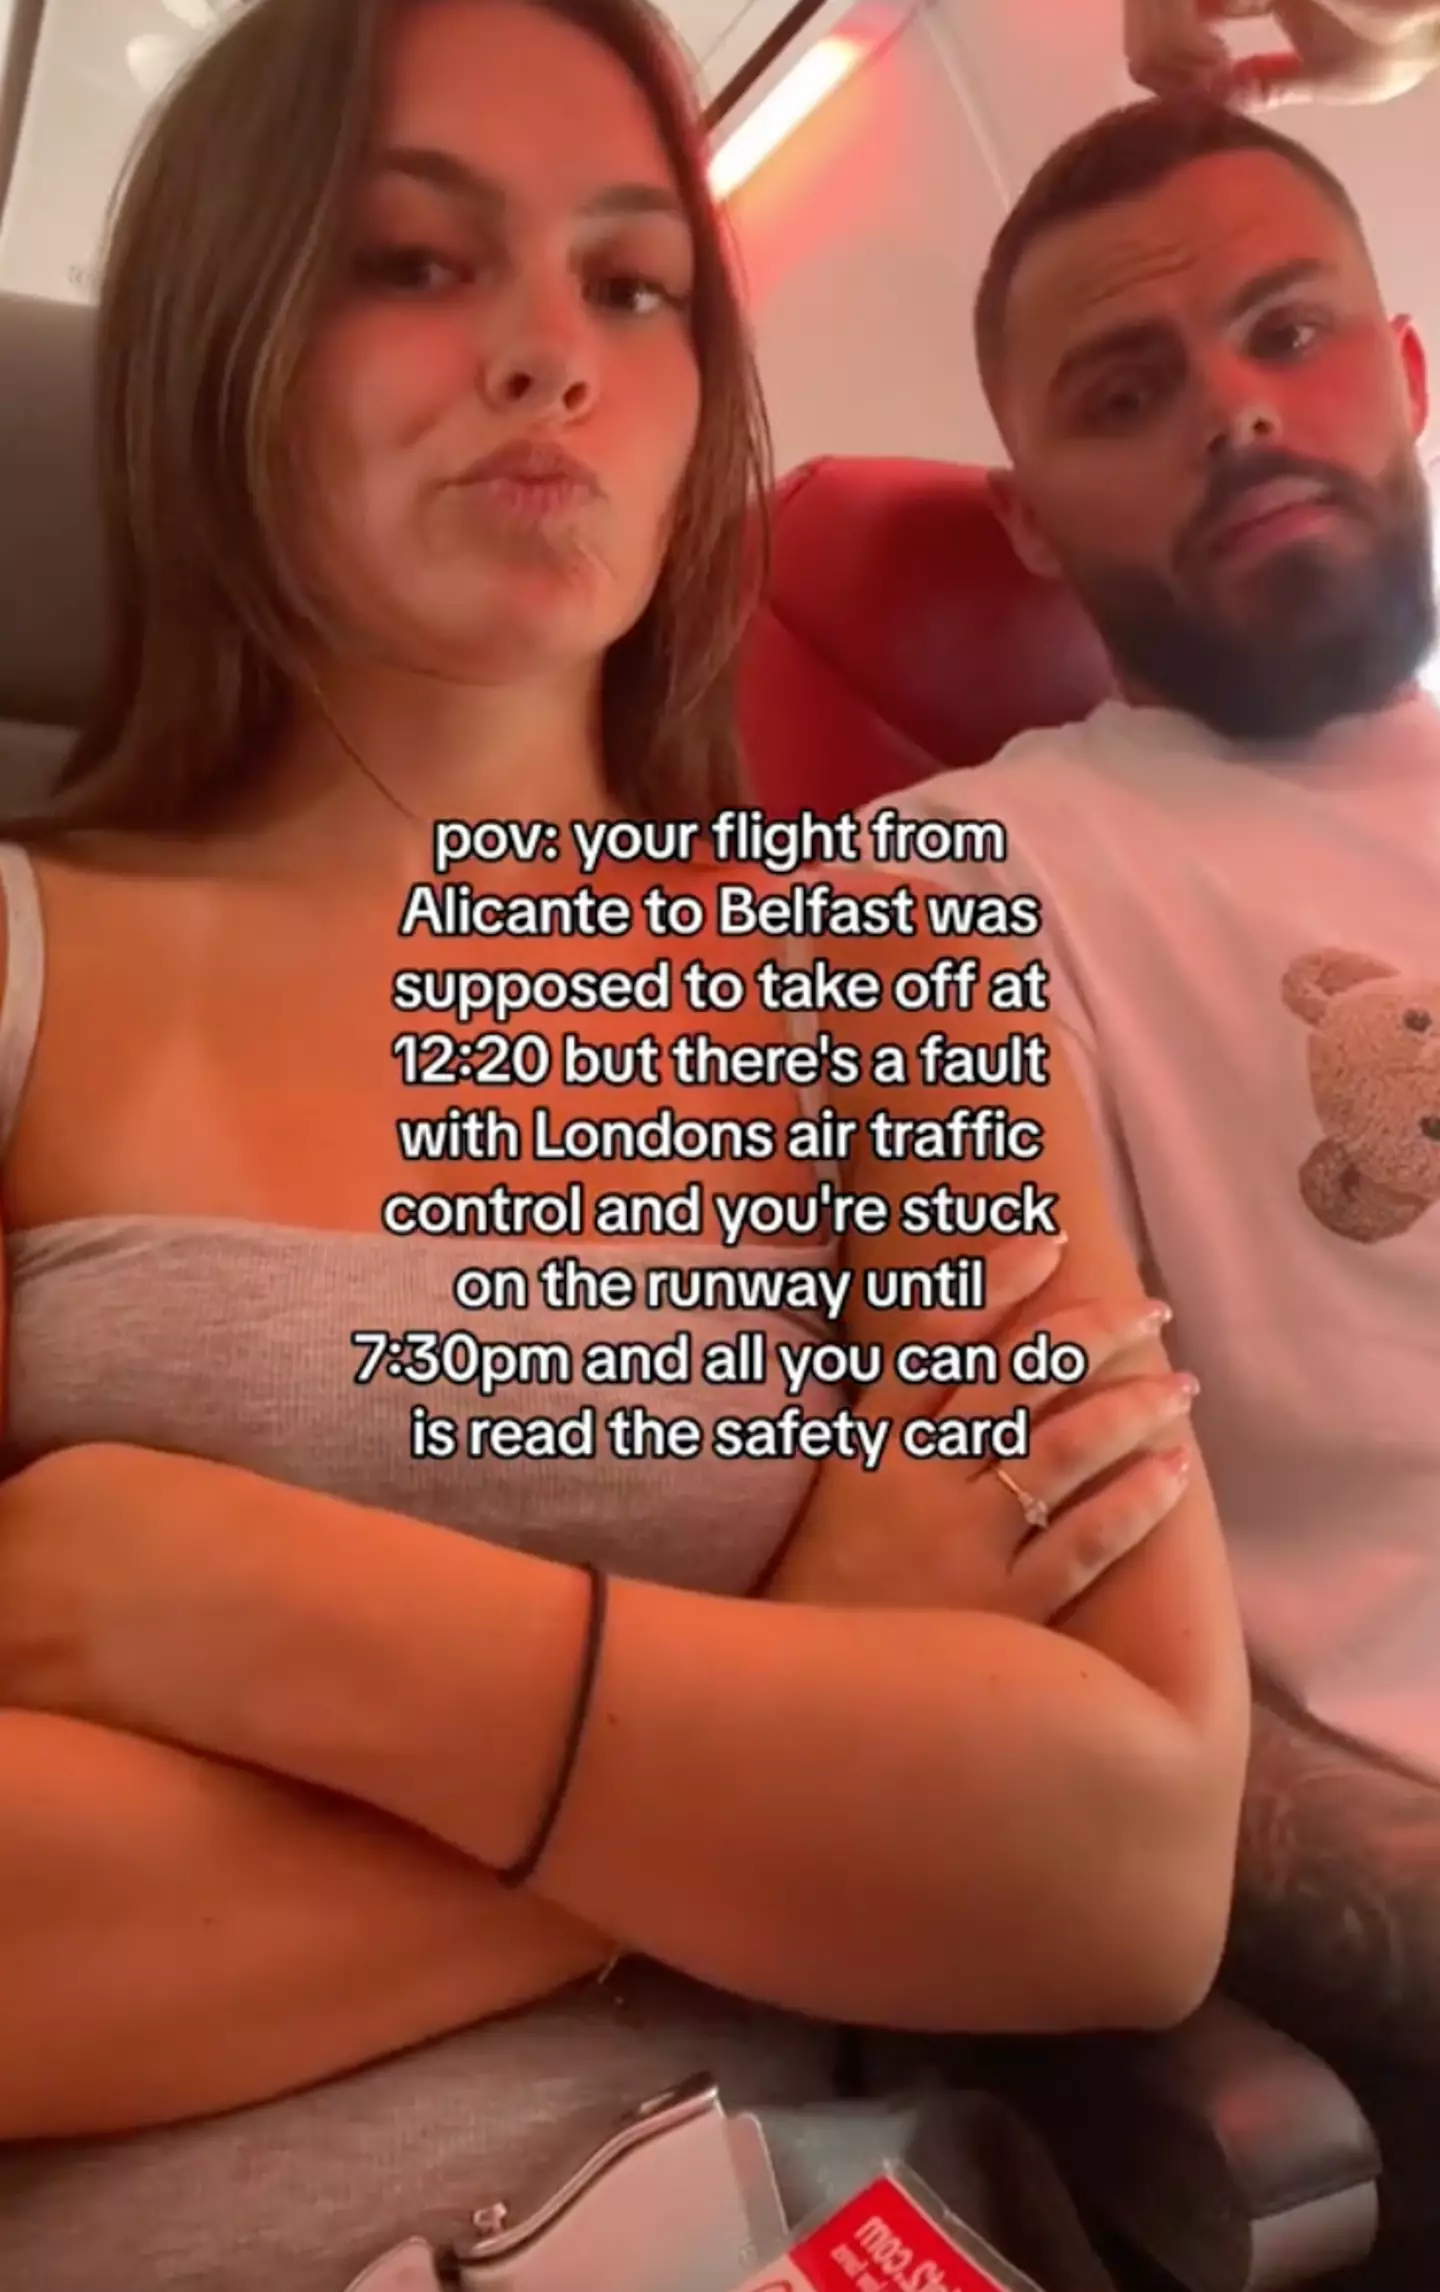 The pair were made to stay on the plane runway for a whole 10 hours.